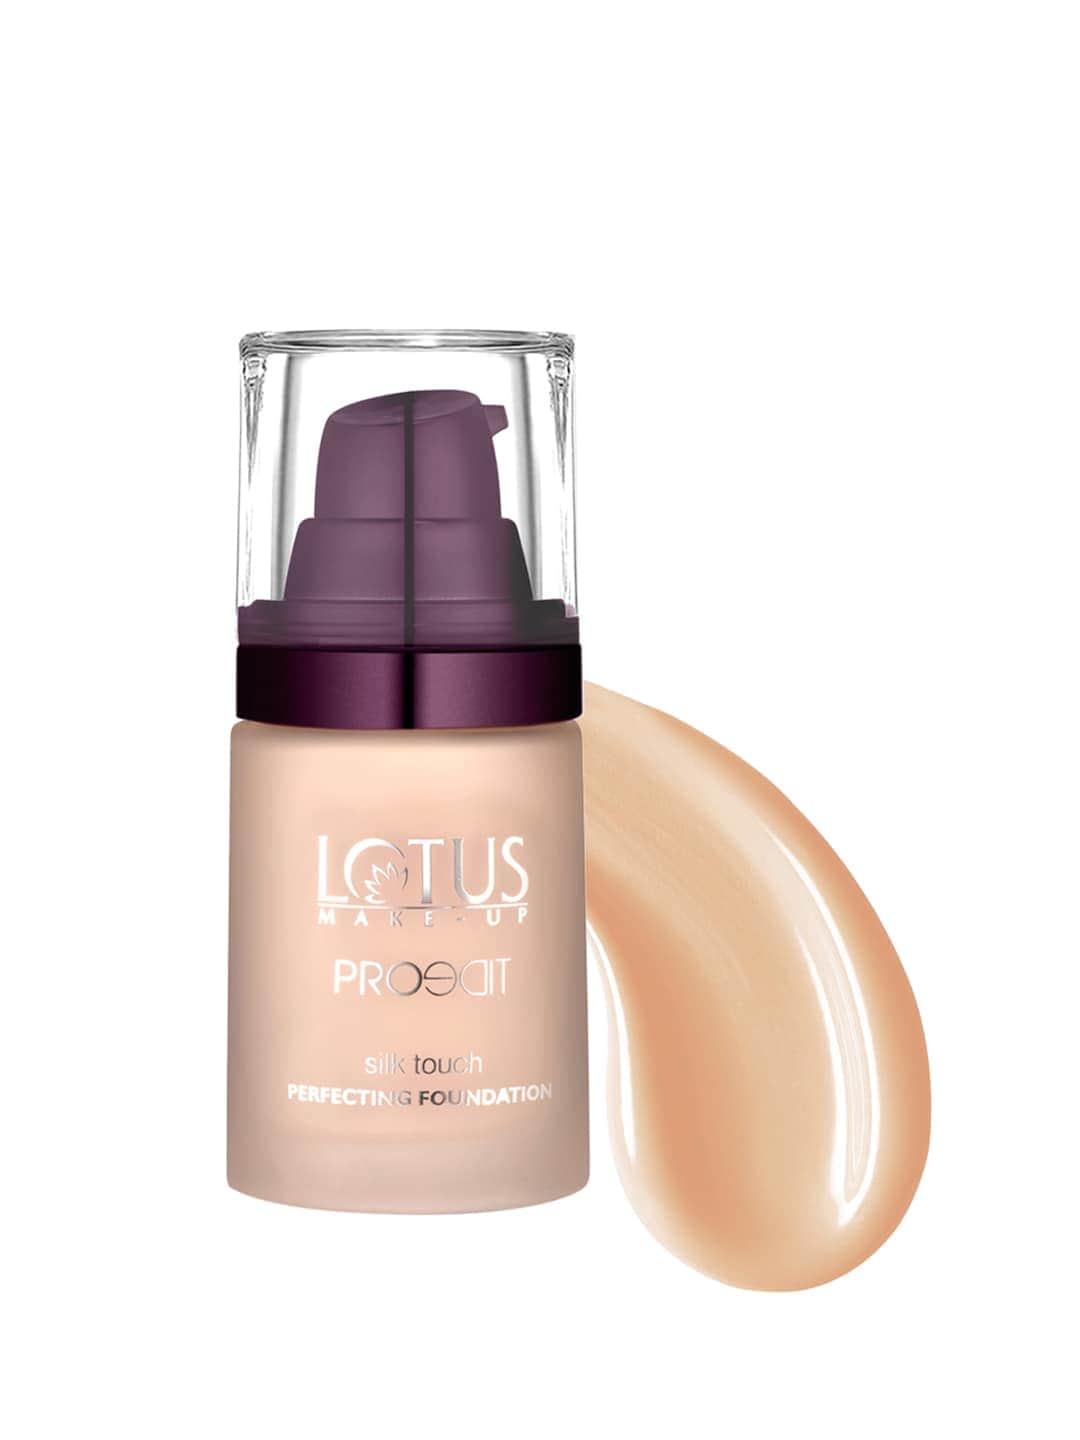 Lotus Herbals Sustainable Proedit Silk Touch Perfecting Foundation - Cashew SF02 30 ml Price in India